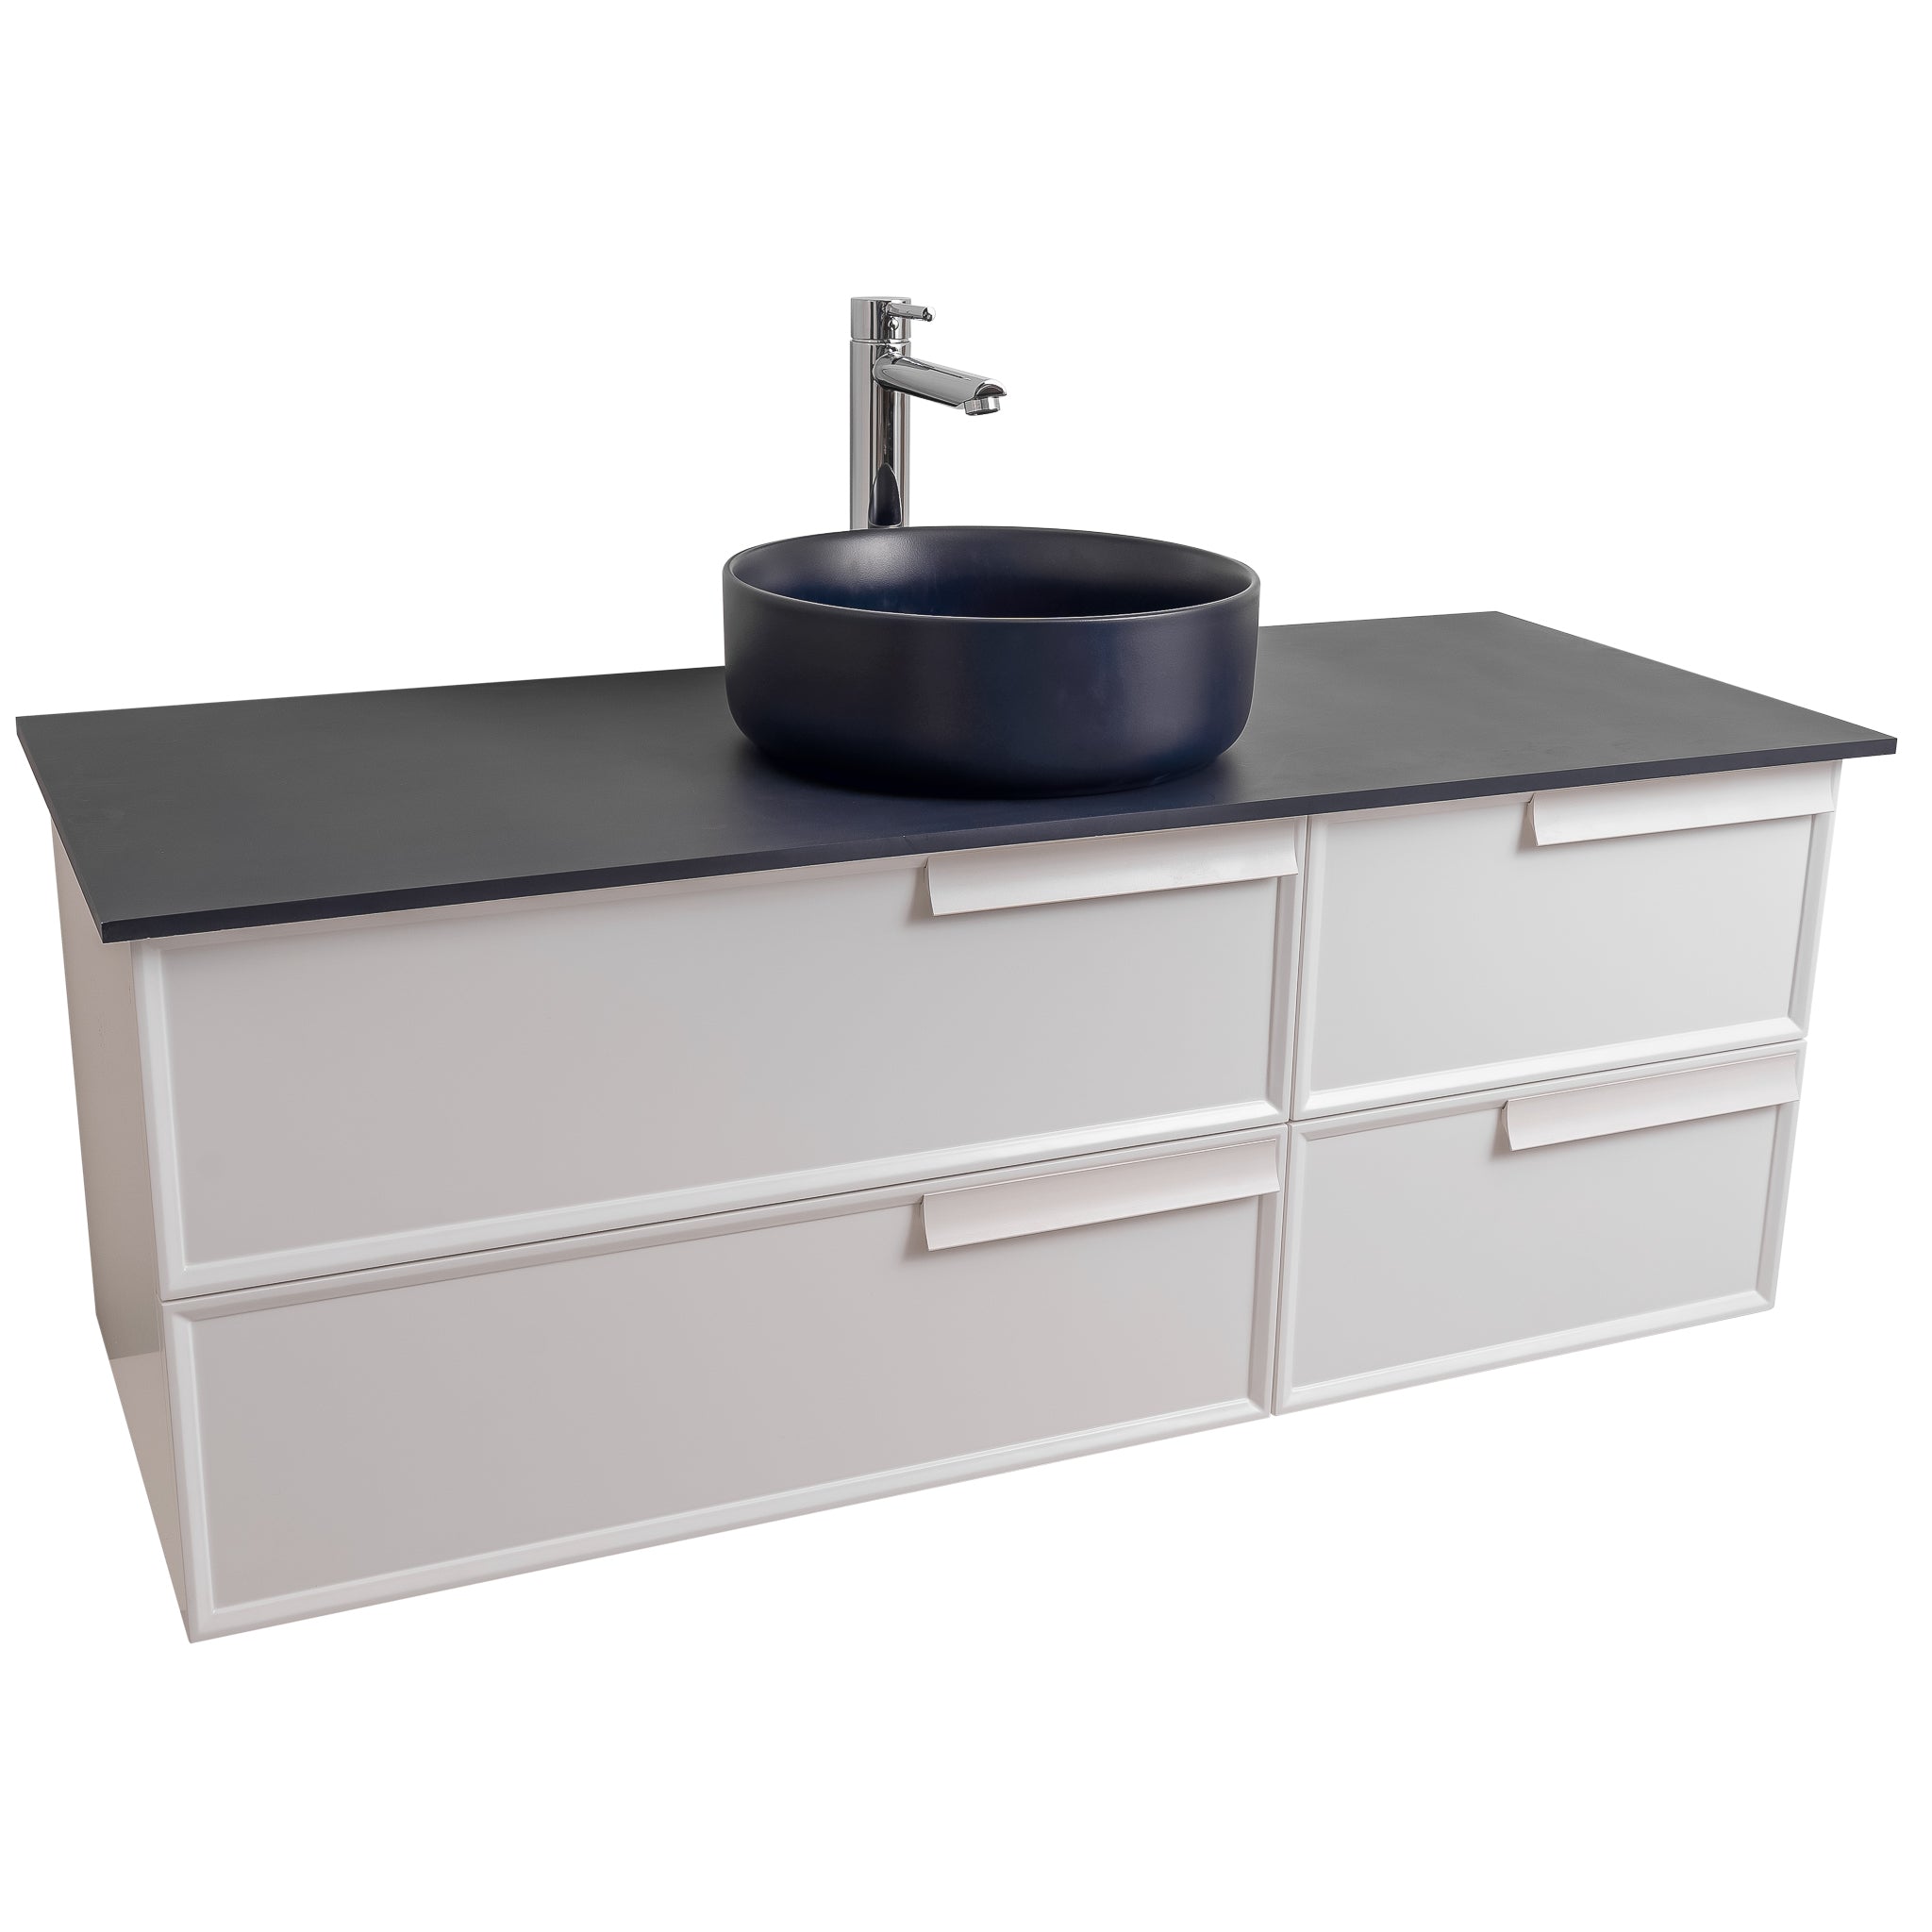 Garda 47.5 Matte White Cabinet, Ares Navy Blue Top and Ares Navy Blue Ceramic Basin, Wall Mounted Modern Vanity Set